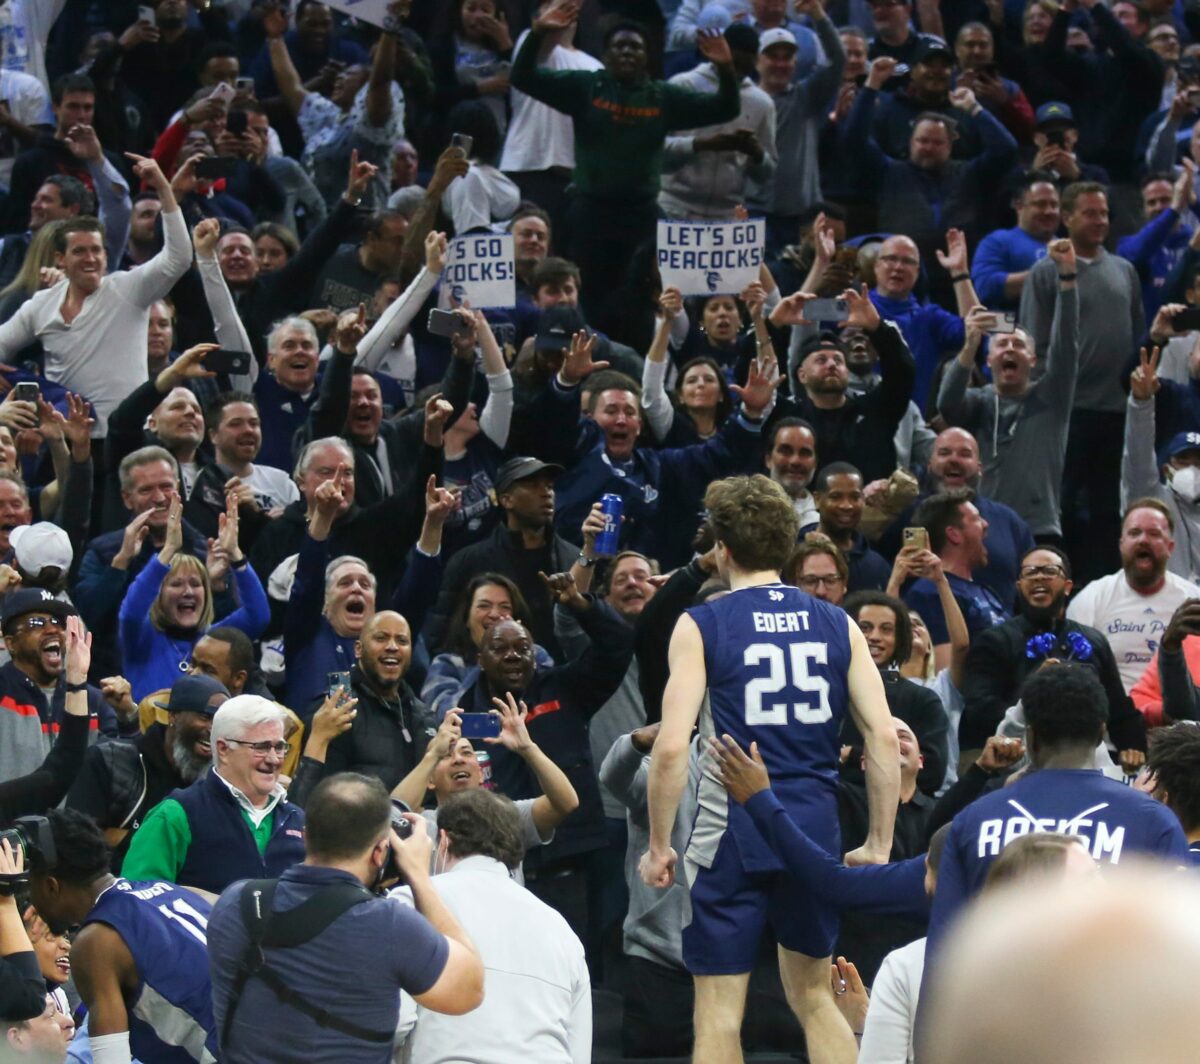 Saint Peter’s guard Doug Edert surprised his teammates and coach with his Kobe Bryant-like celebration